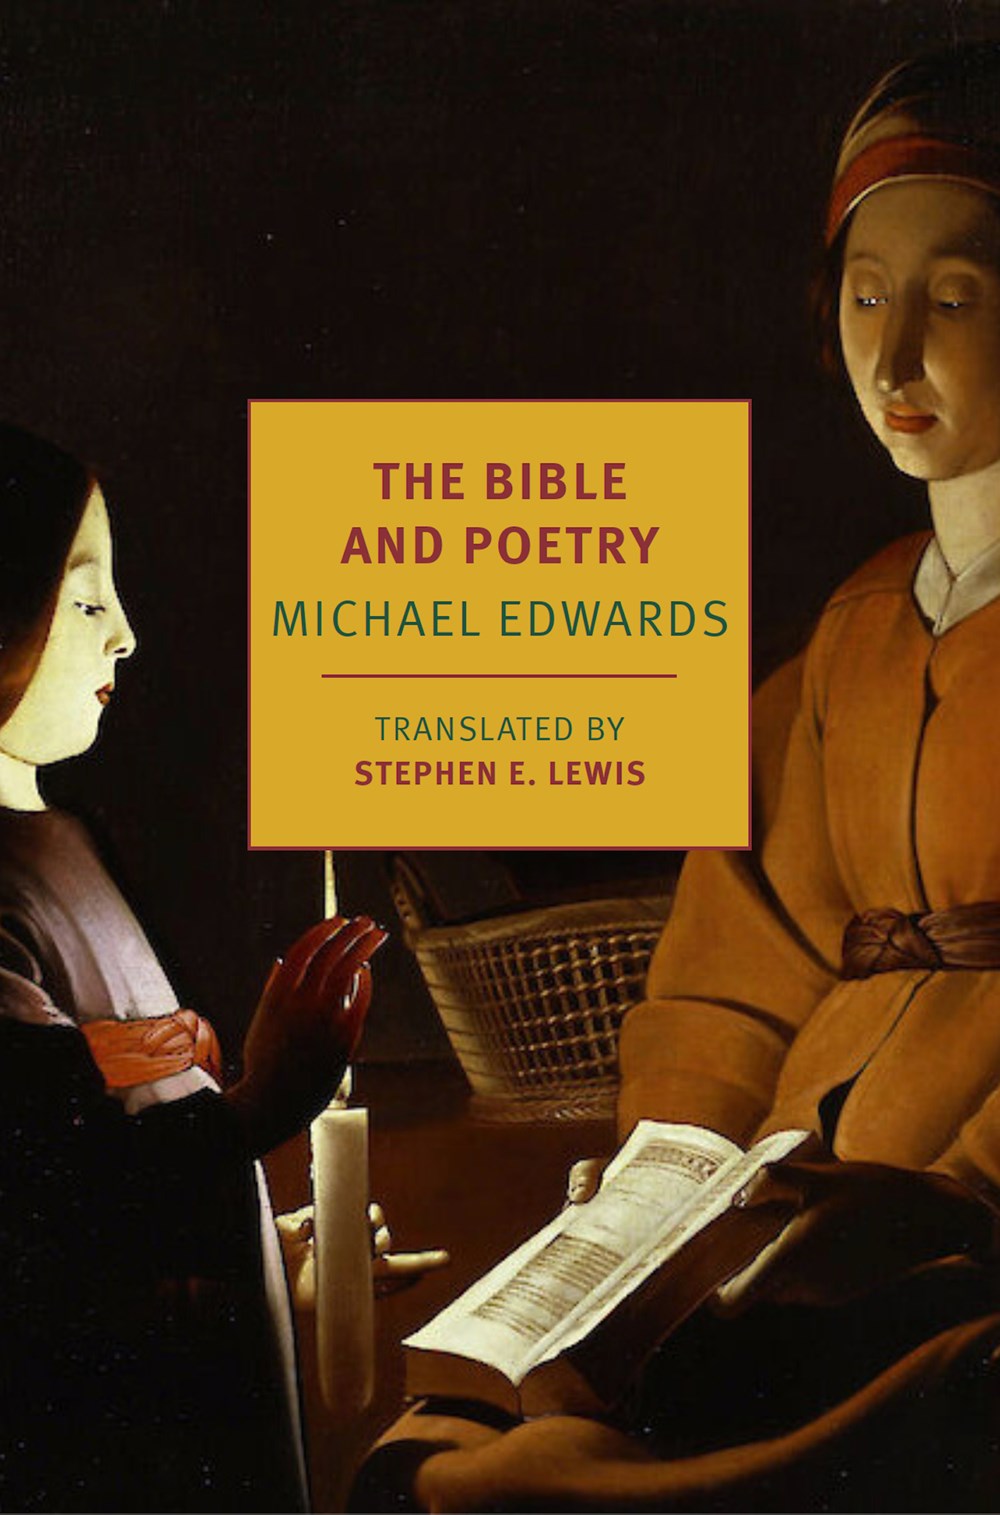 The Bible and Poetry by Michael Edwards